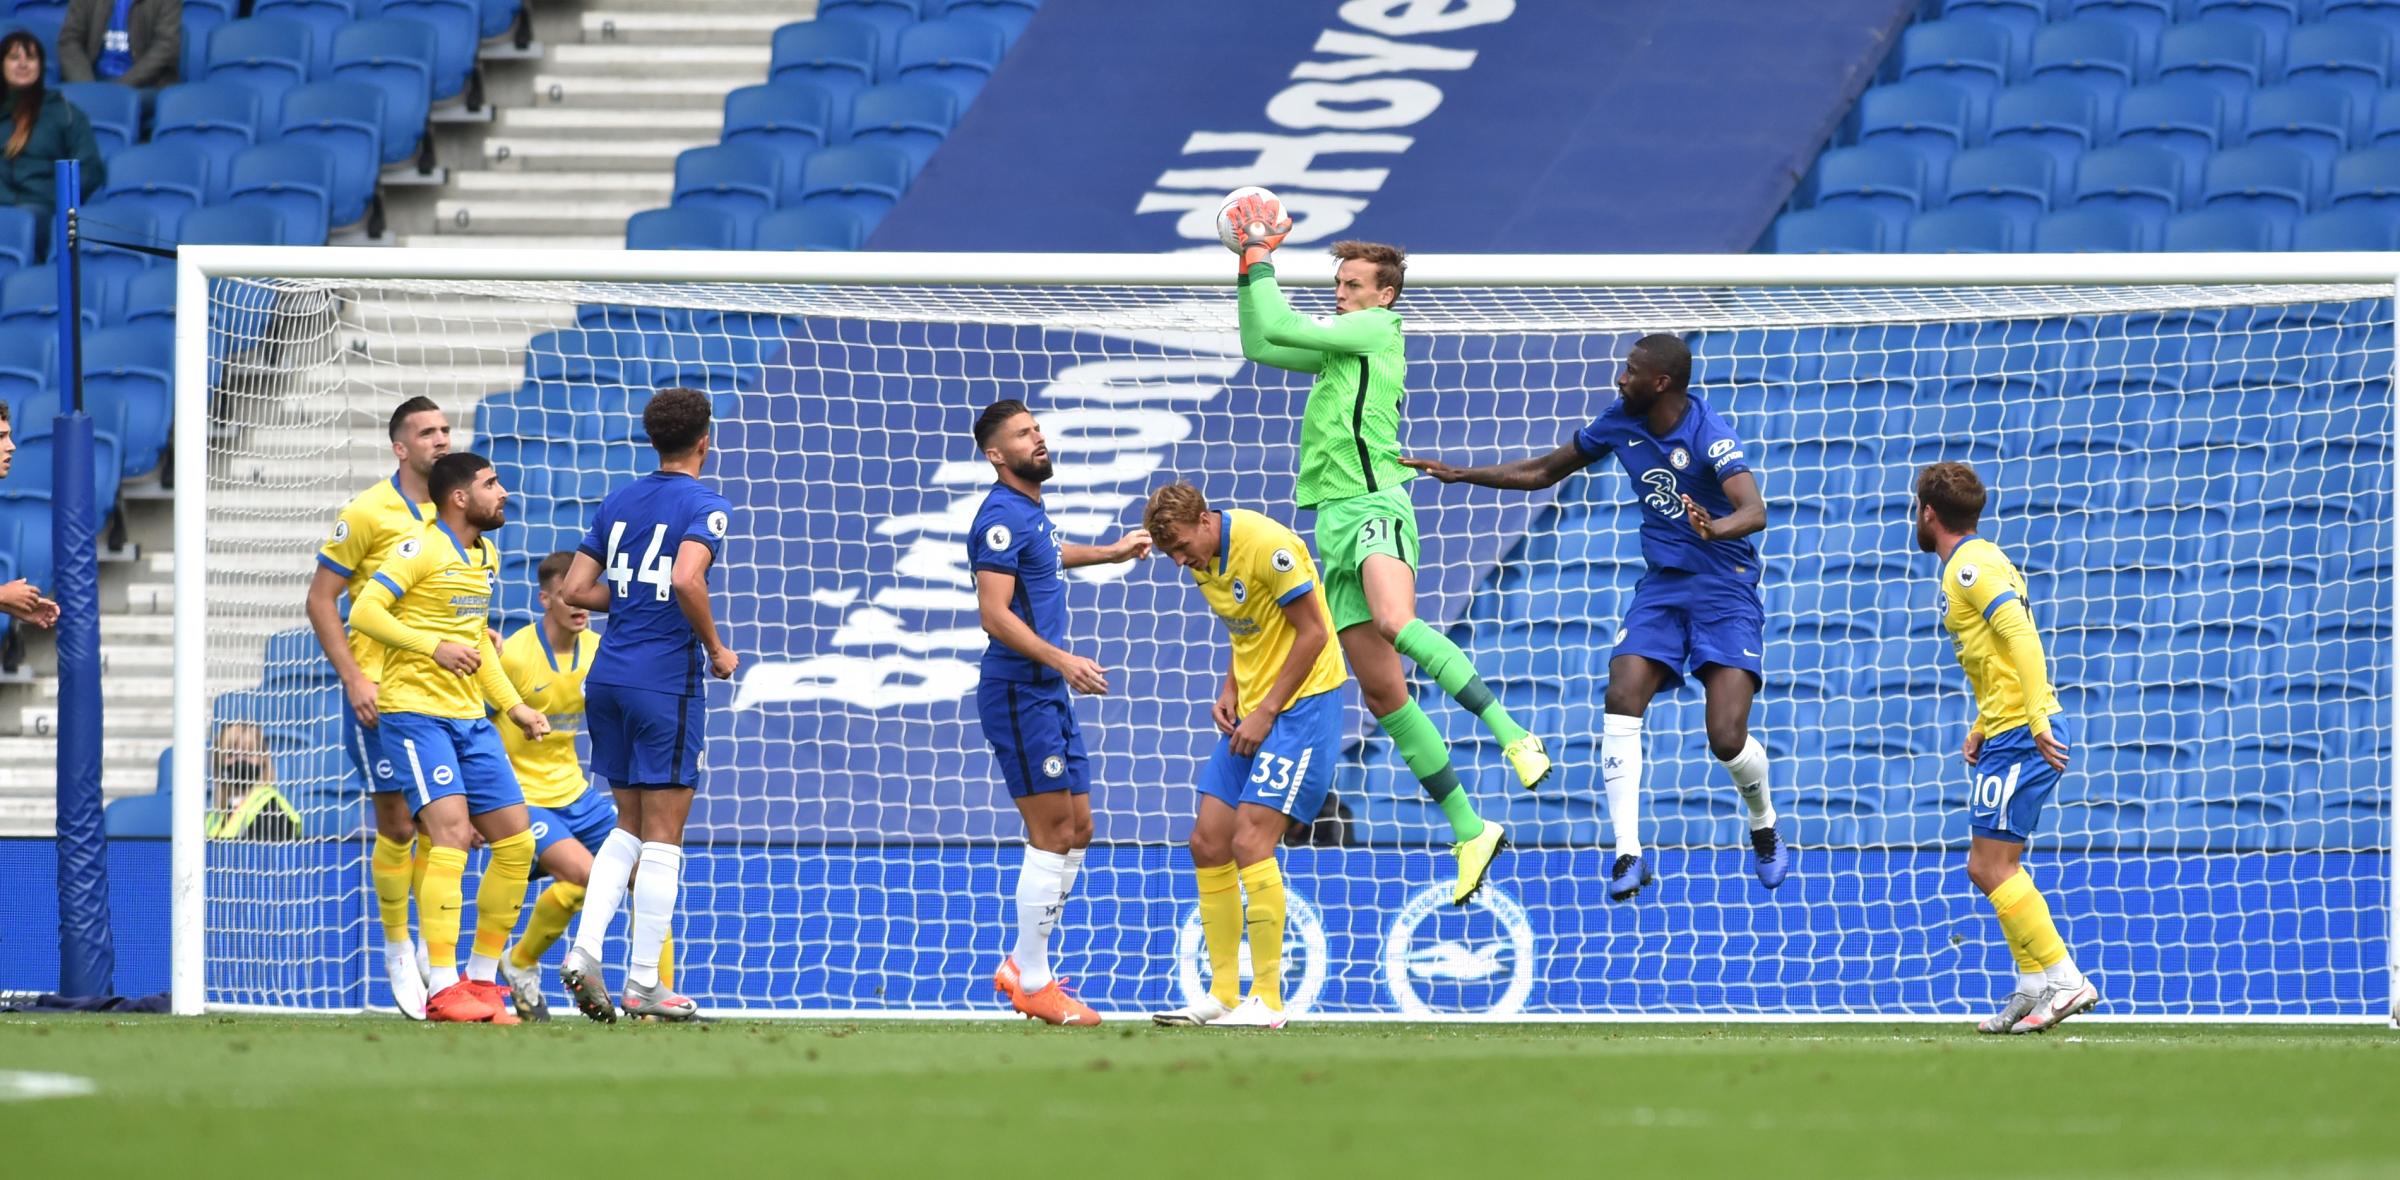 Christian Walton injured as Albion draw with Chelsea